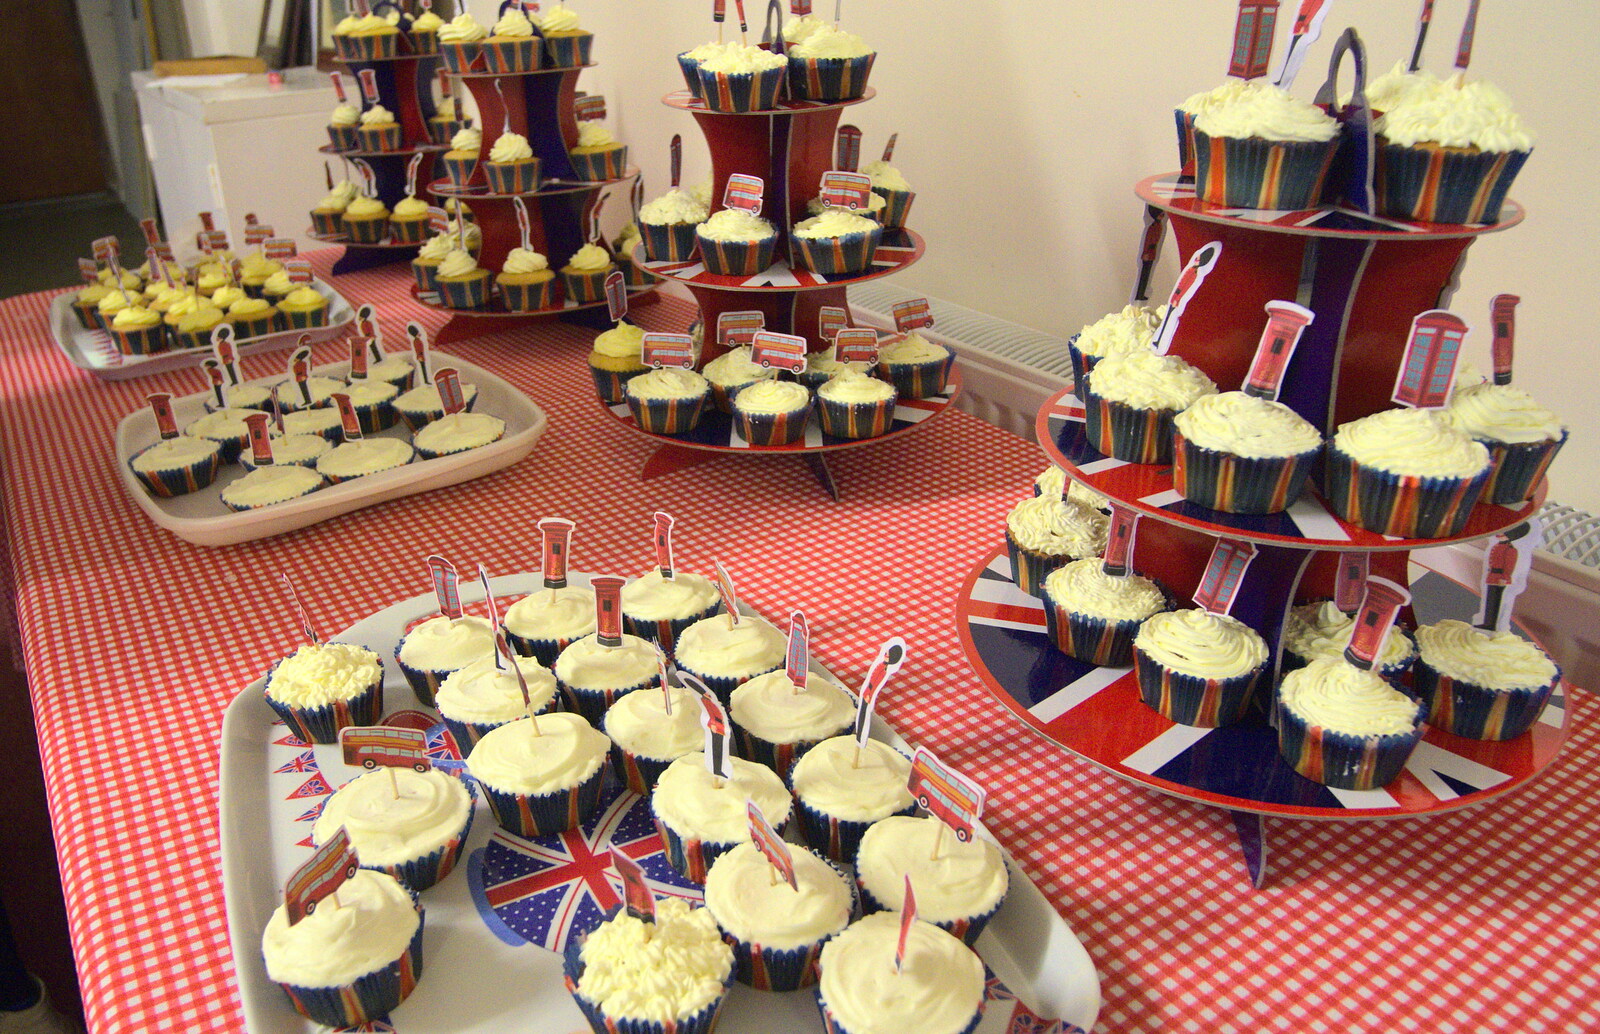 A heap of celebration cup-cakes from The Queen's Village Hall Birthday, Brome, Suffolk - 12th June 2016